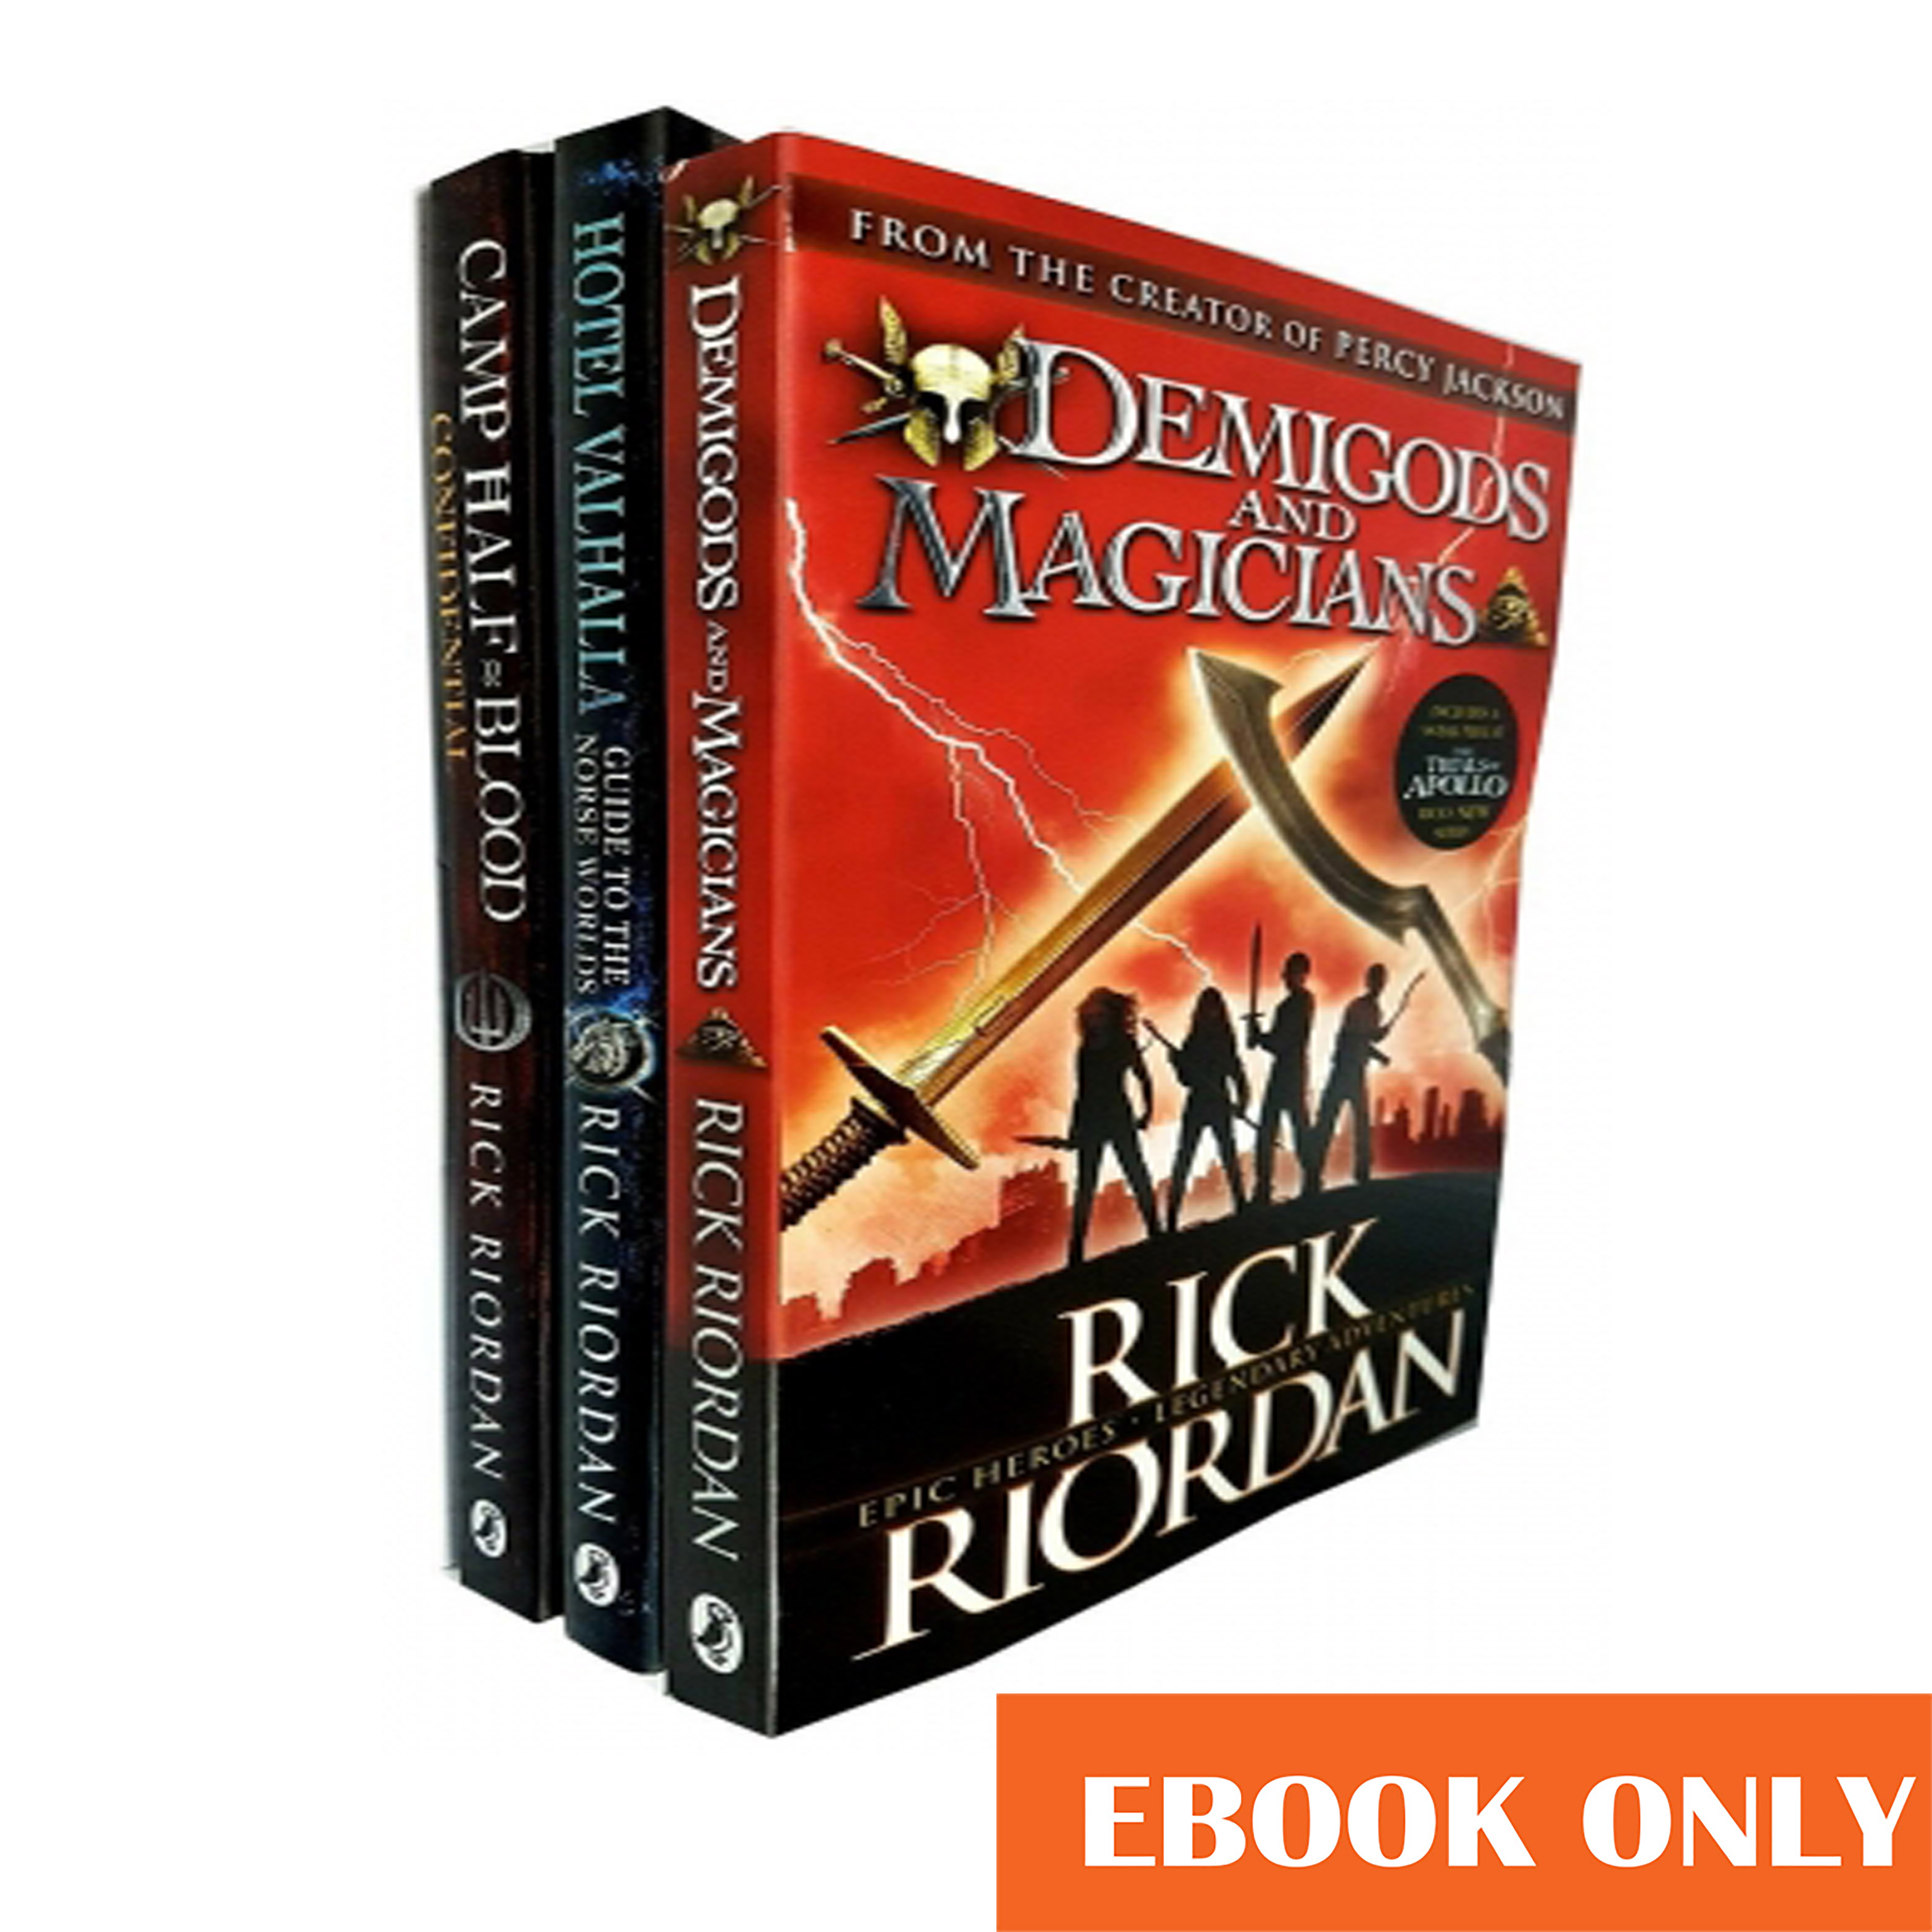 demigods and magicians read online free pdf